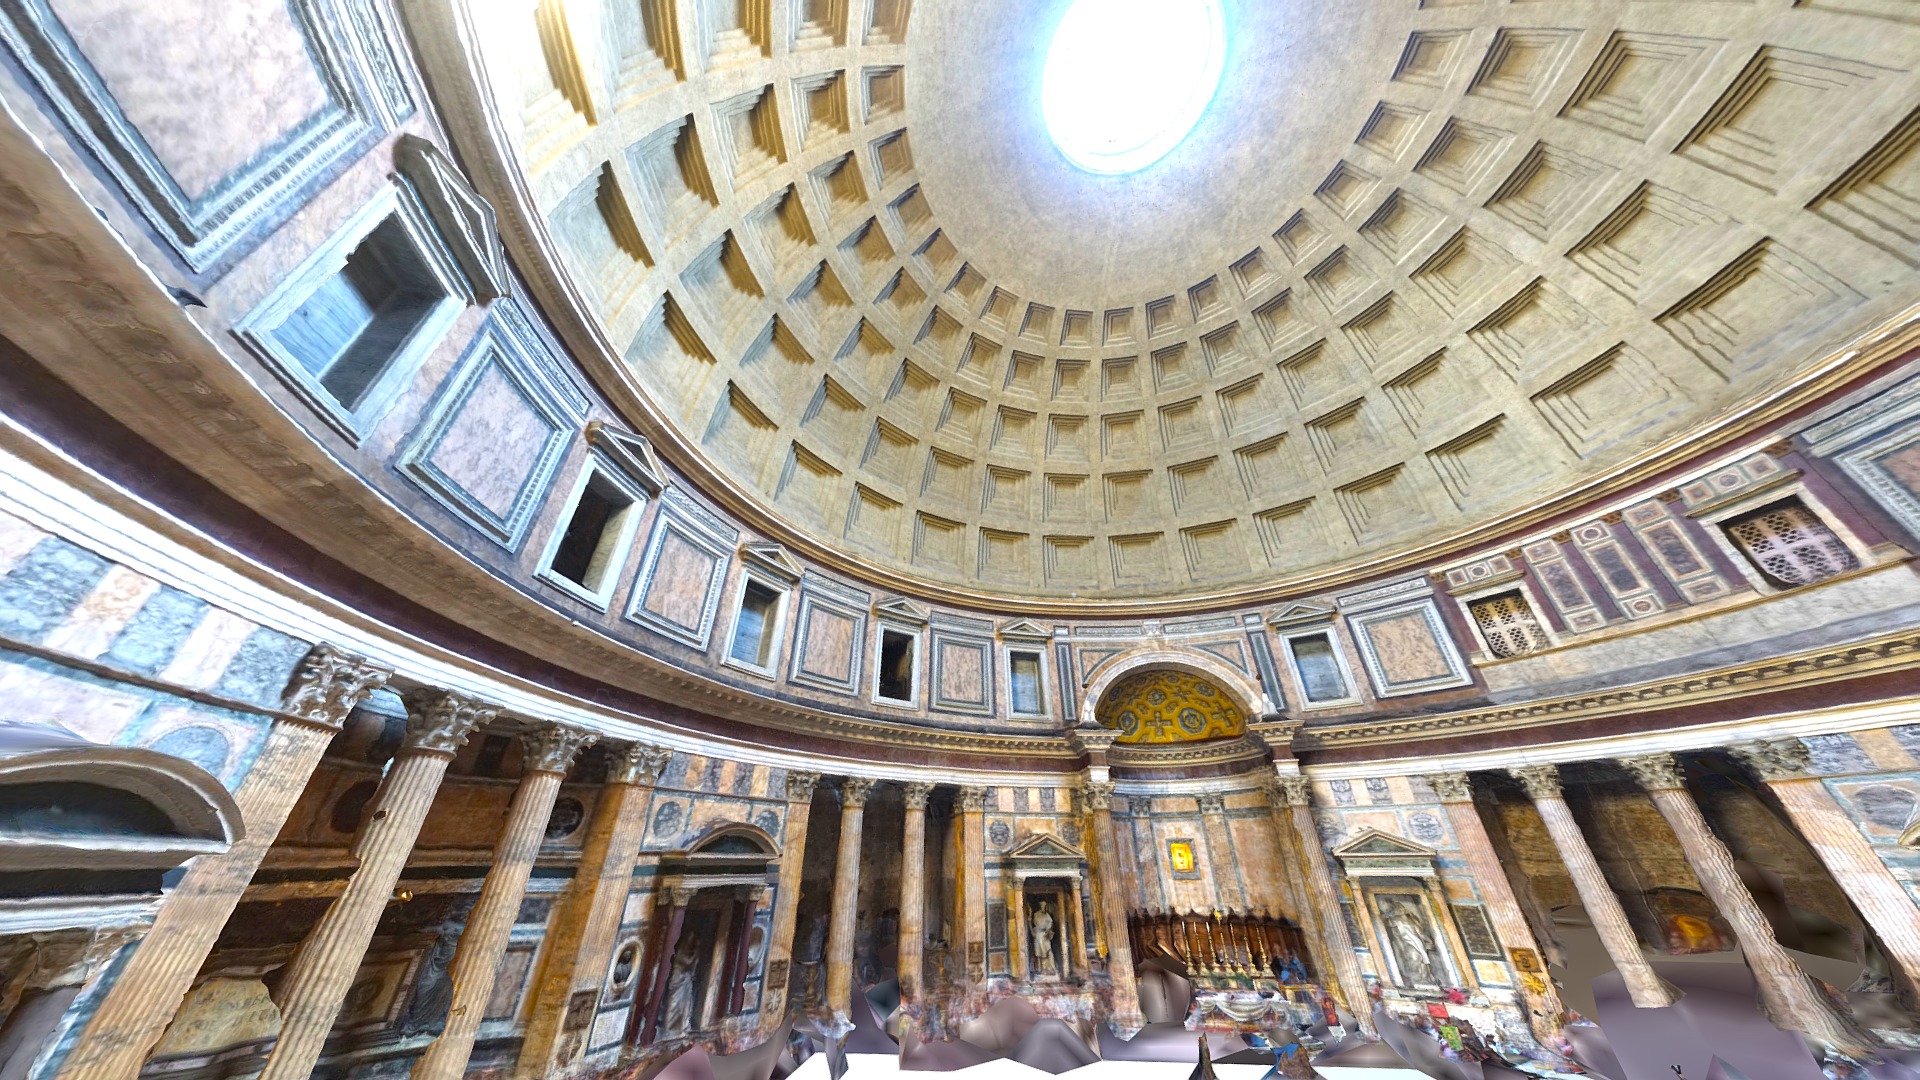 3D model Pantheon, Rome - This is a 3D model of the Pantheon, Rome. The 3D model is about a large building with a large glass ceiling with Pantheon, Rome in the background.